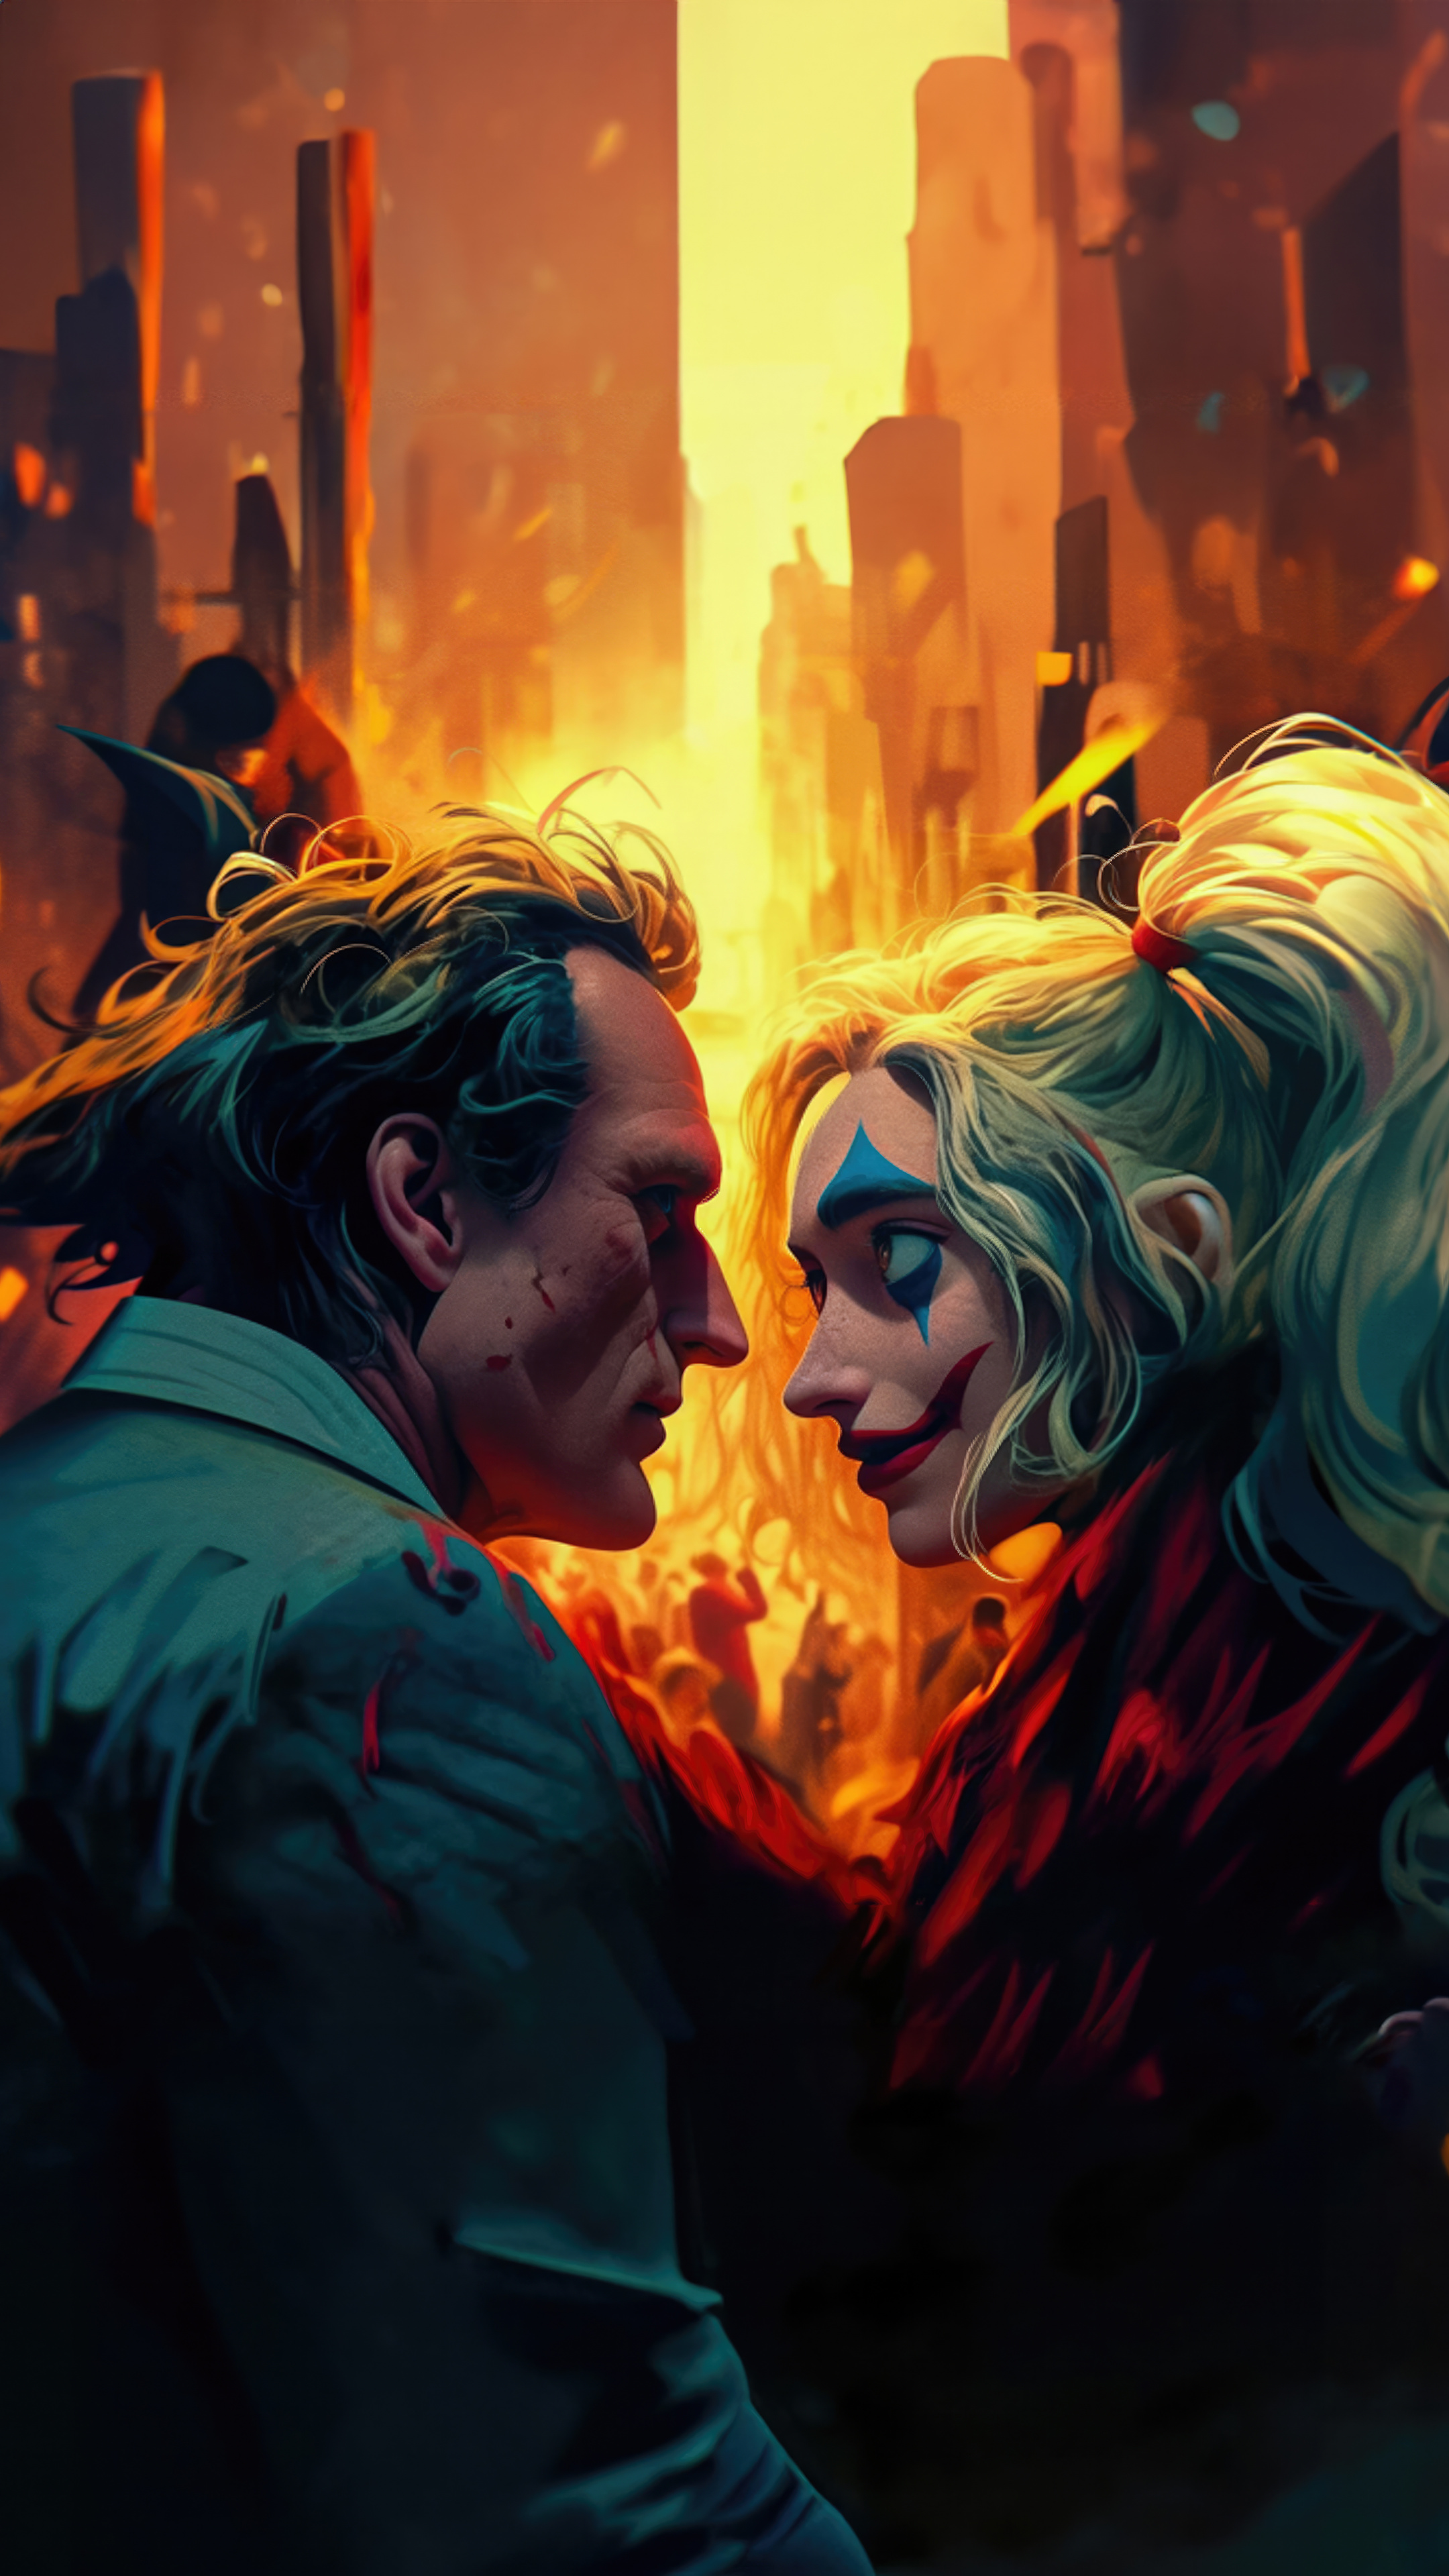 2160x3840 Joker And Harley Quinn Chaotic Affection Sony Xperia X,XZ,Z5 ...